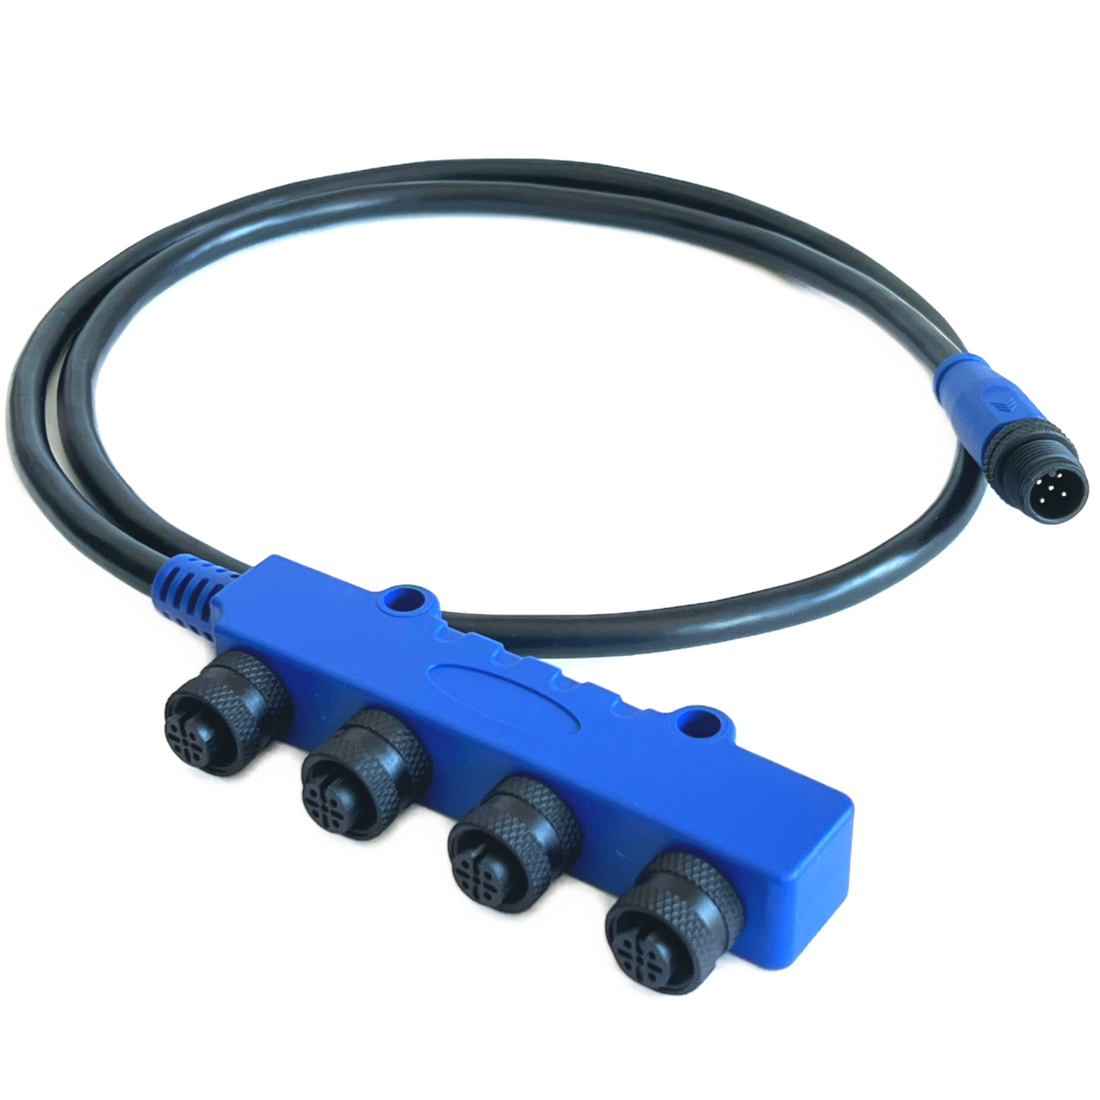 NMEA 2000 4-Way Splitter Cable (1.0 M / 3.28 ft) 4 Female to 1 Male